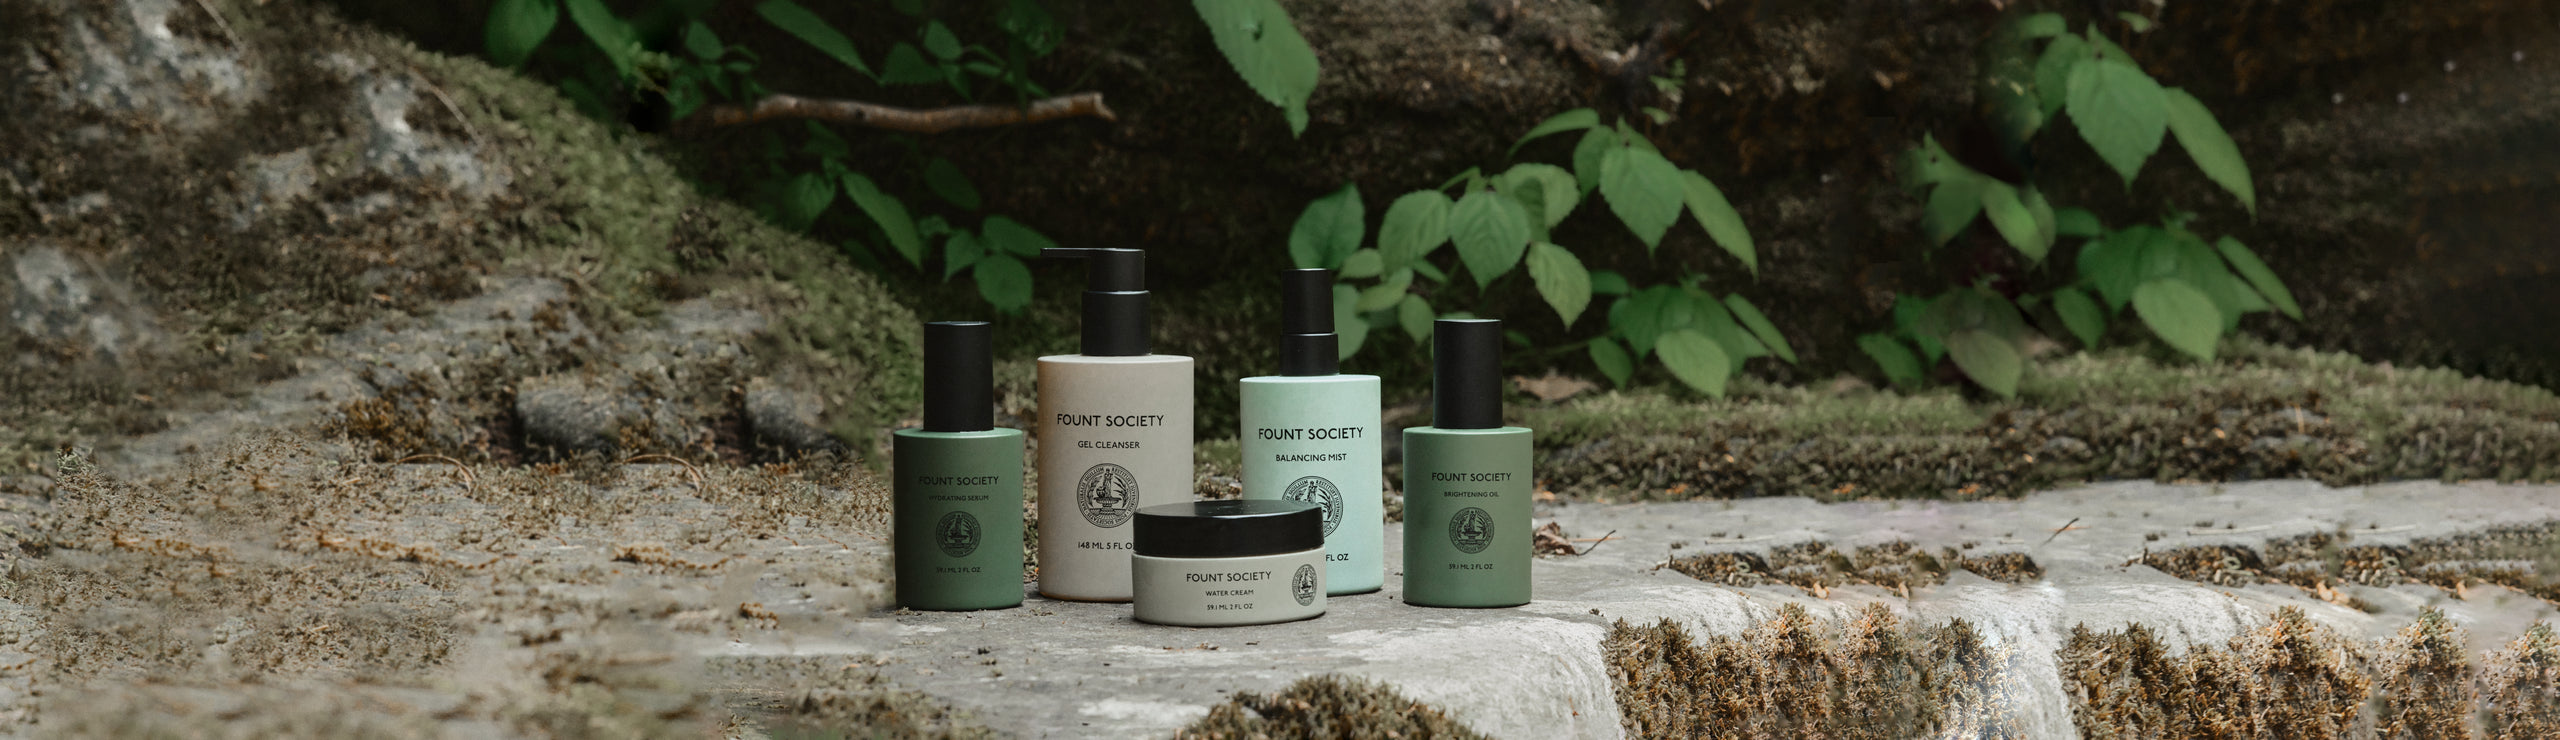 Lineup of Fount Society products in nature.